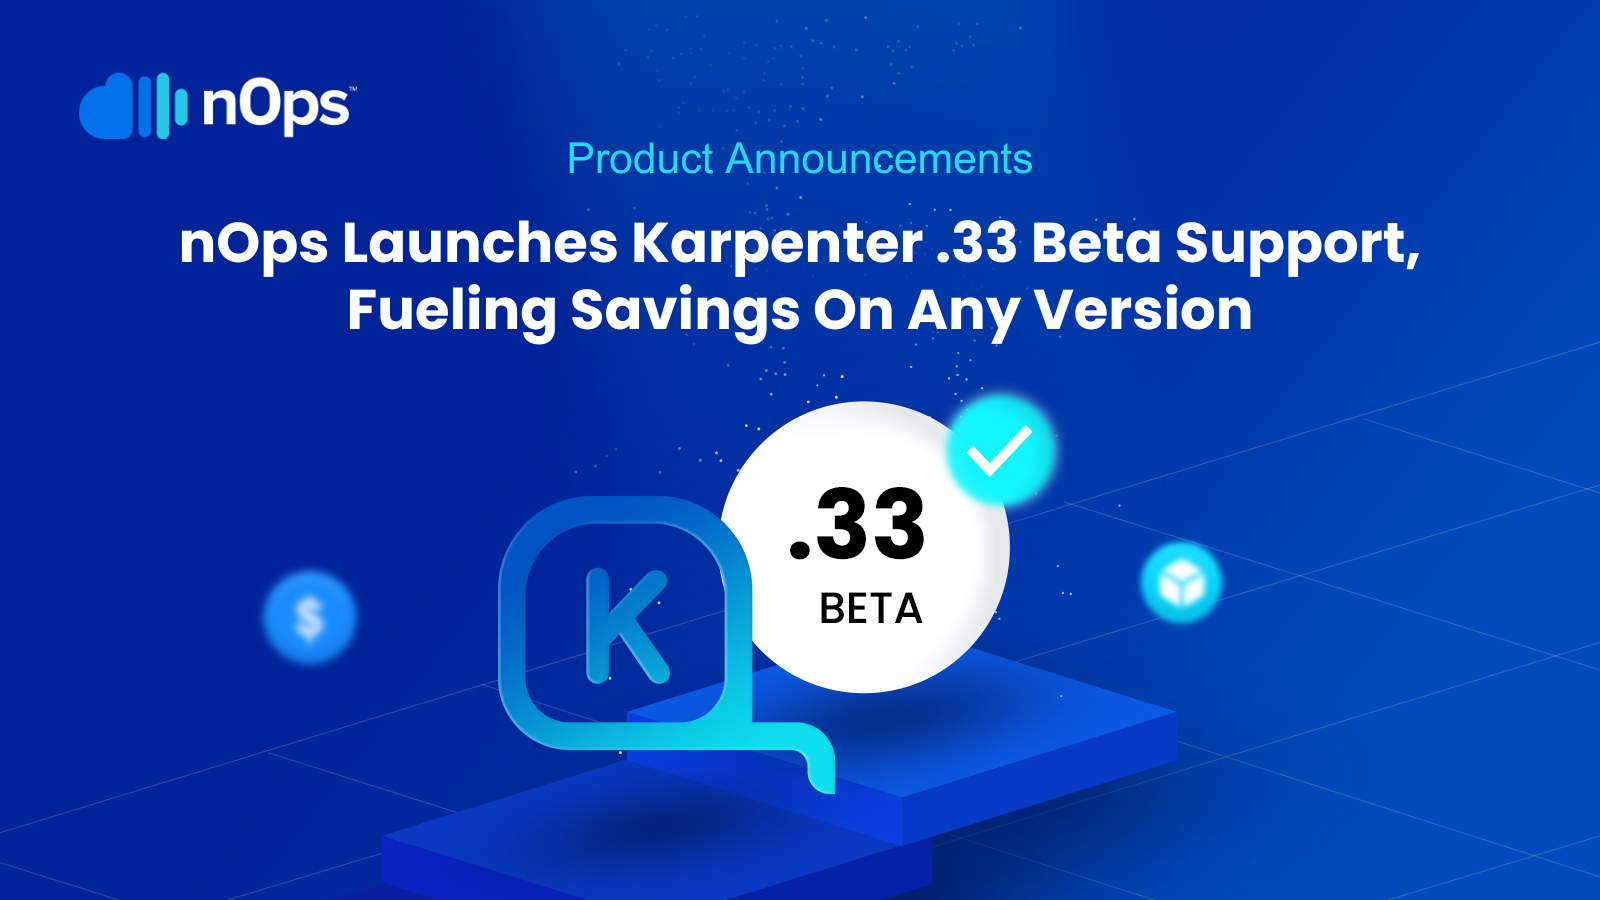 Featured image of the product announcements blog titled “nOps Launches Karpenter .33 Beta Support, Fueling Savings On Any Version